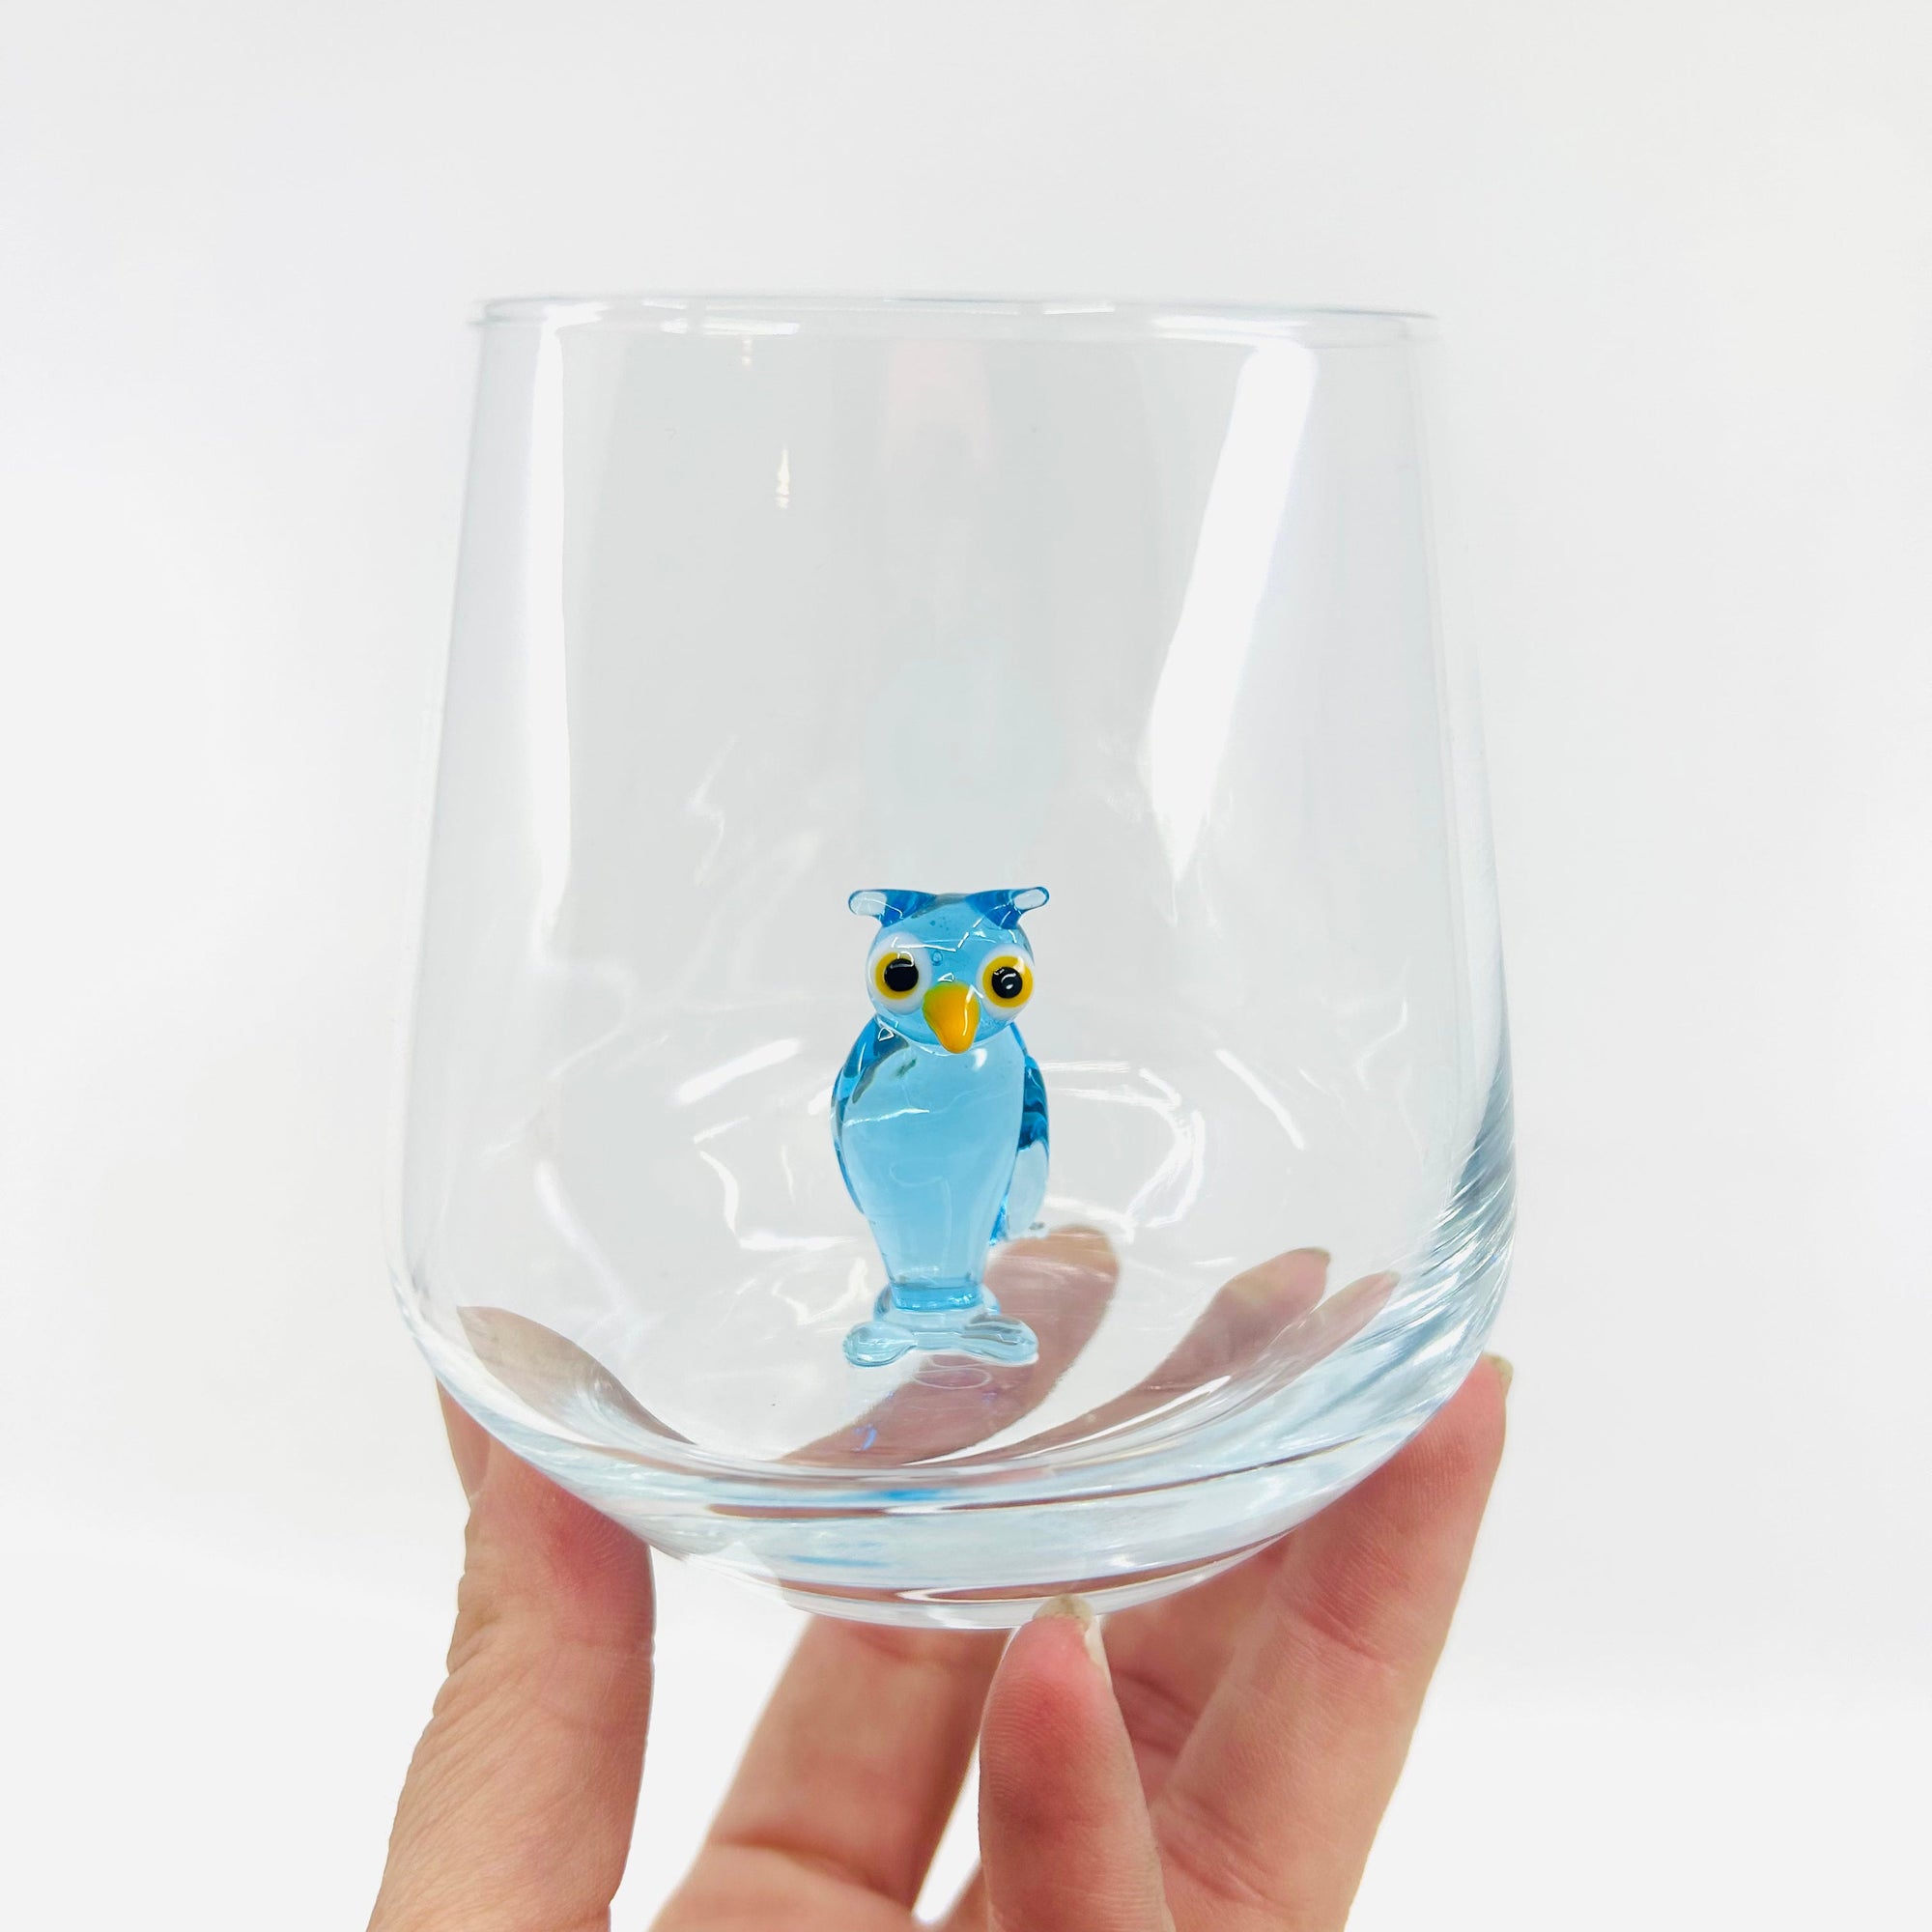 Do You Wanna Have a Cocktail Wine Glass, Snowman Olaf Wine Glass, Frozen  Inspired Wine Glass, Dis Inspired Wine Glass, Gift 